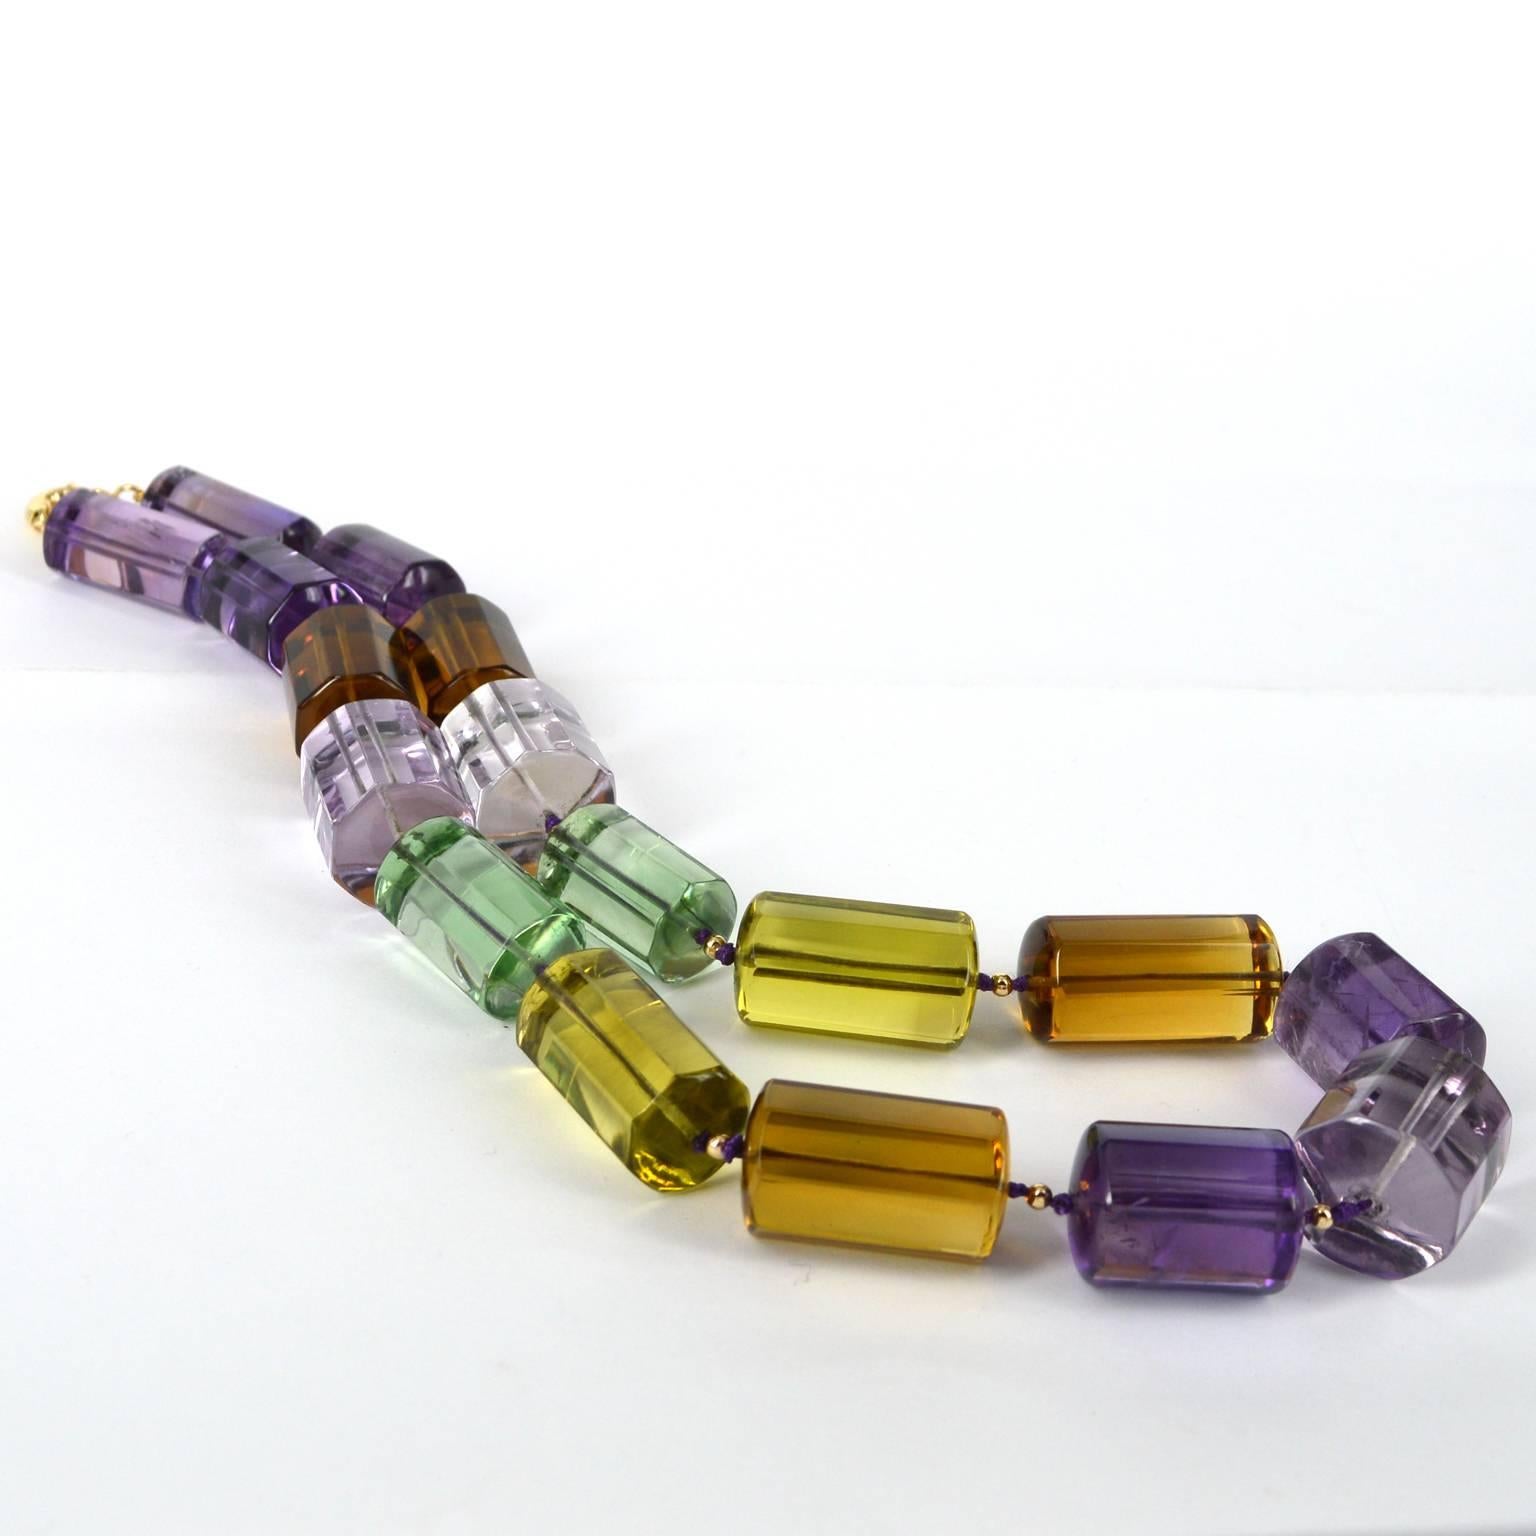 Huge Tubes of Multi-coloured Amethyst, light dark purple and green combine with Lemon and Beer Quartz make this is a magnificent one off piece. Beads range in size from 13 x 29mm to 21 x 23mm for the centre stone. Spaced with 14k Gold 3mm round